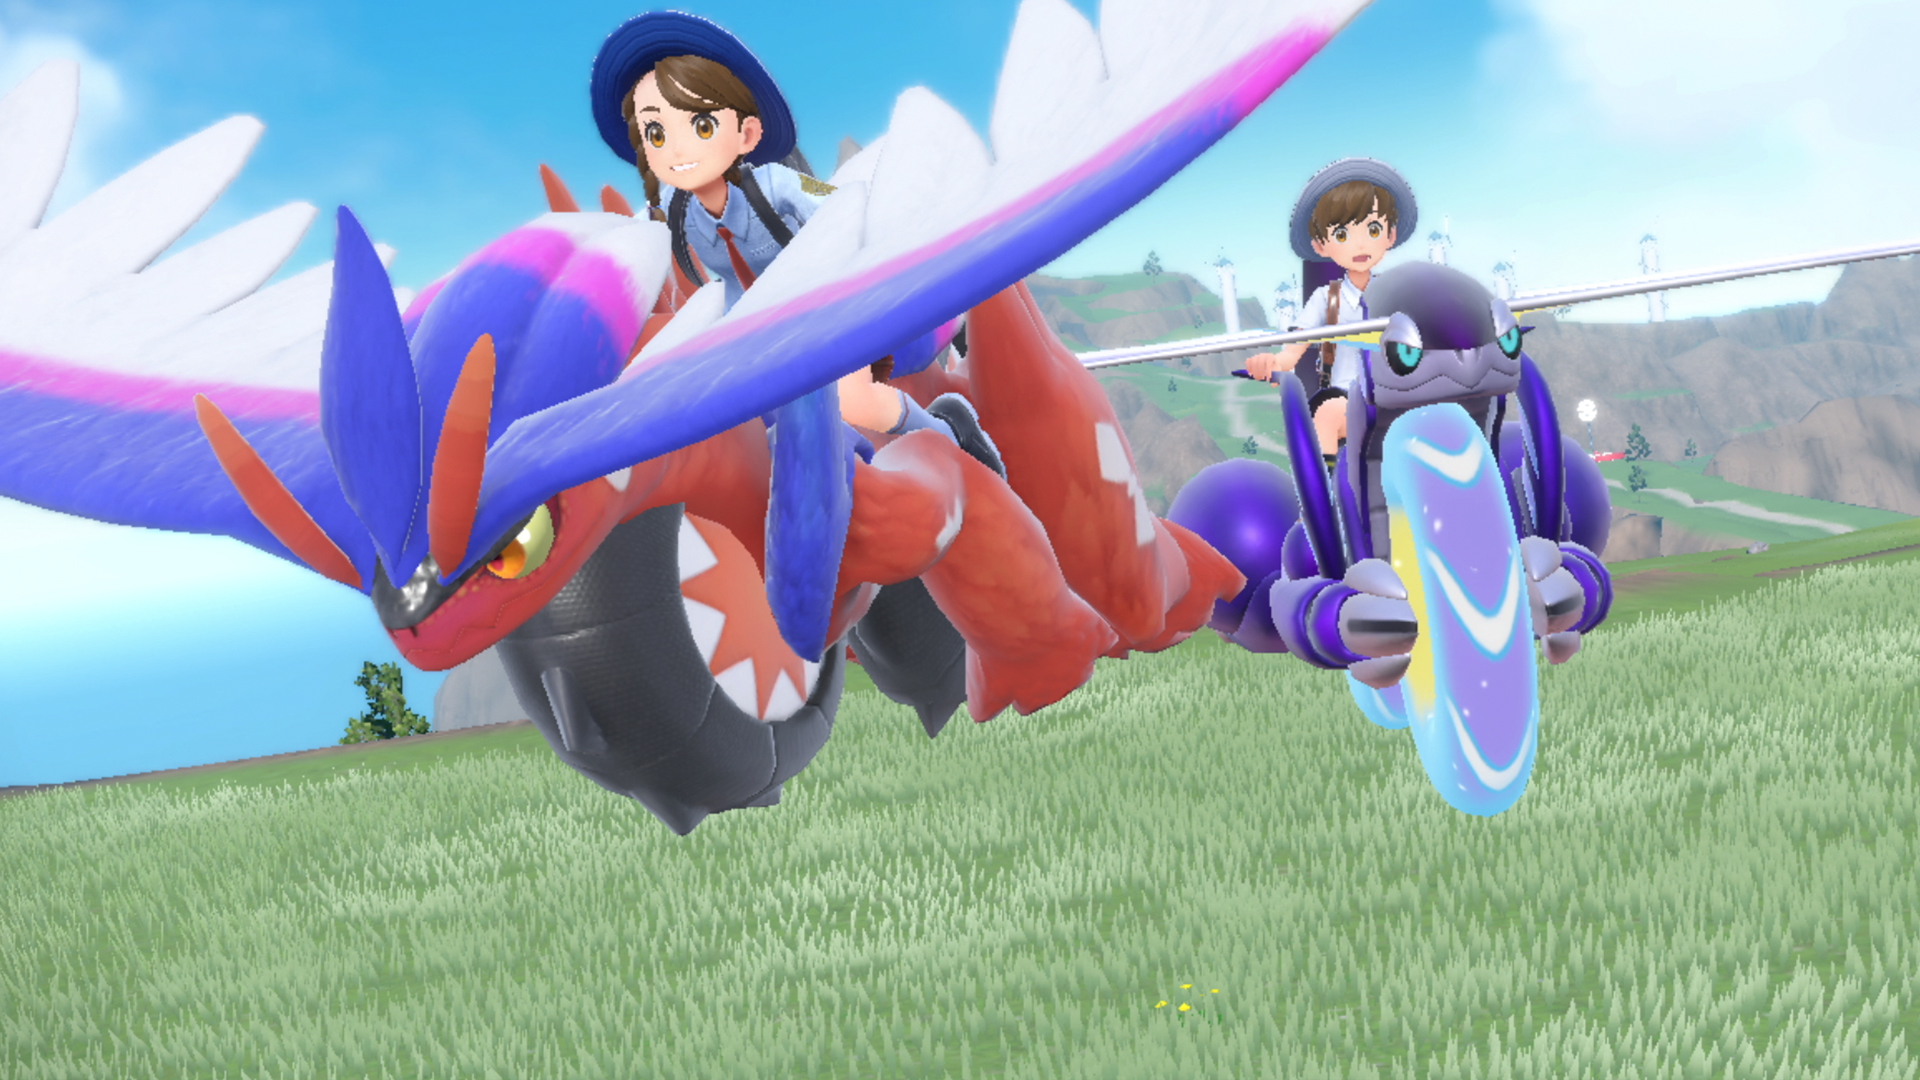 Catch ’em in an open world with Pokémon Scarlet and Violet, out now